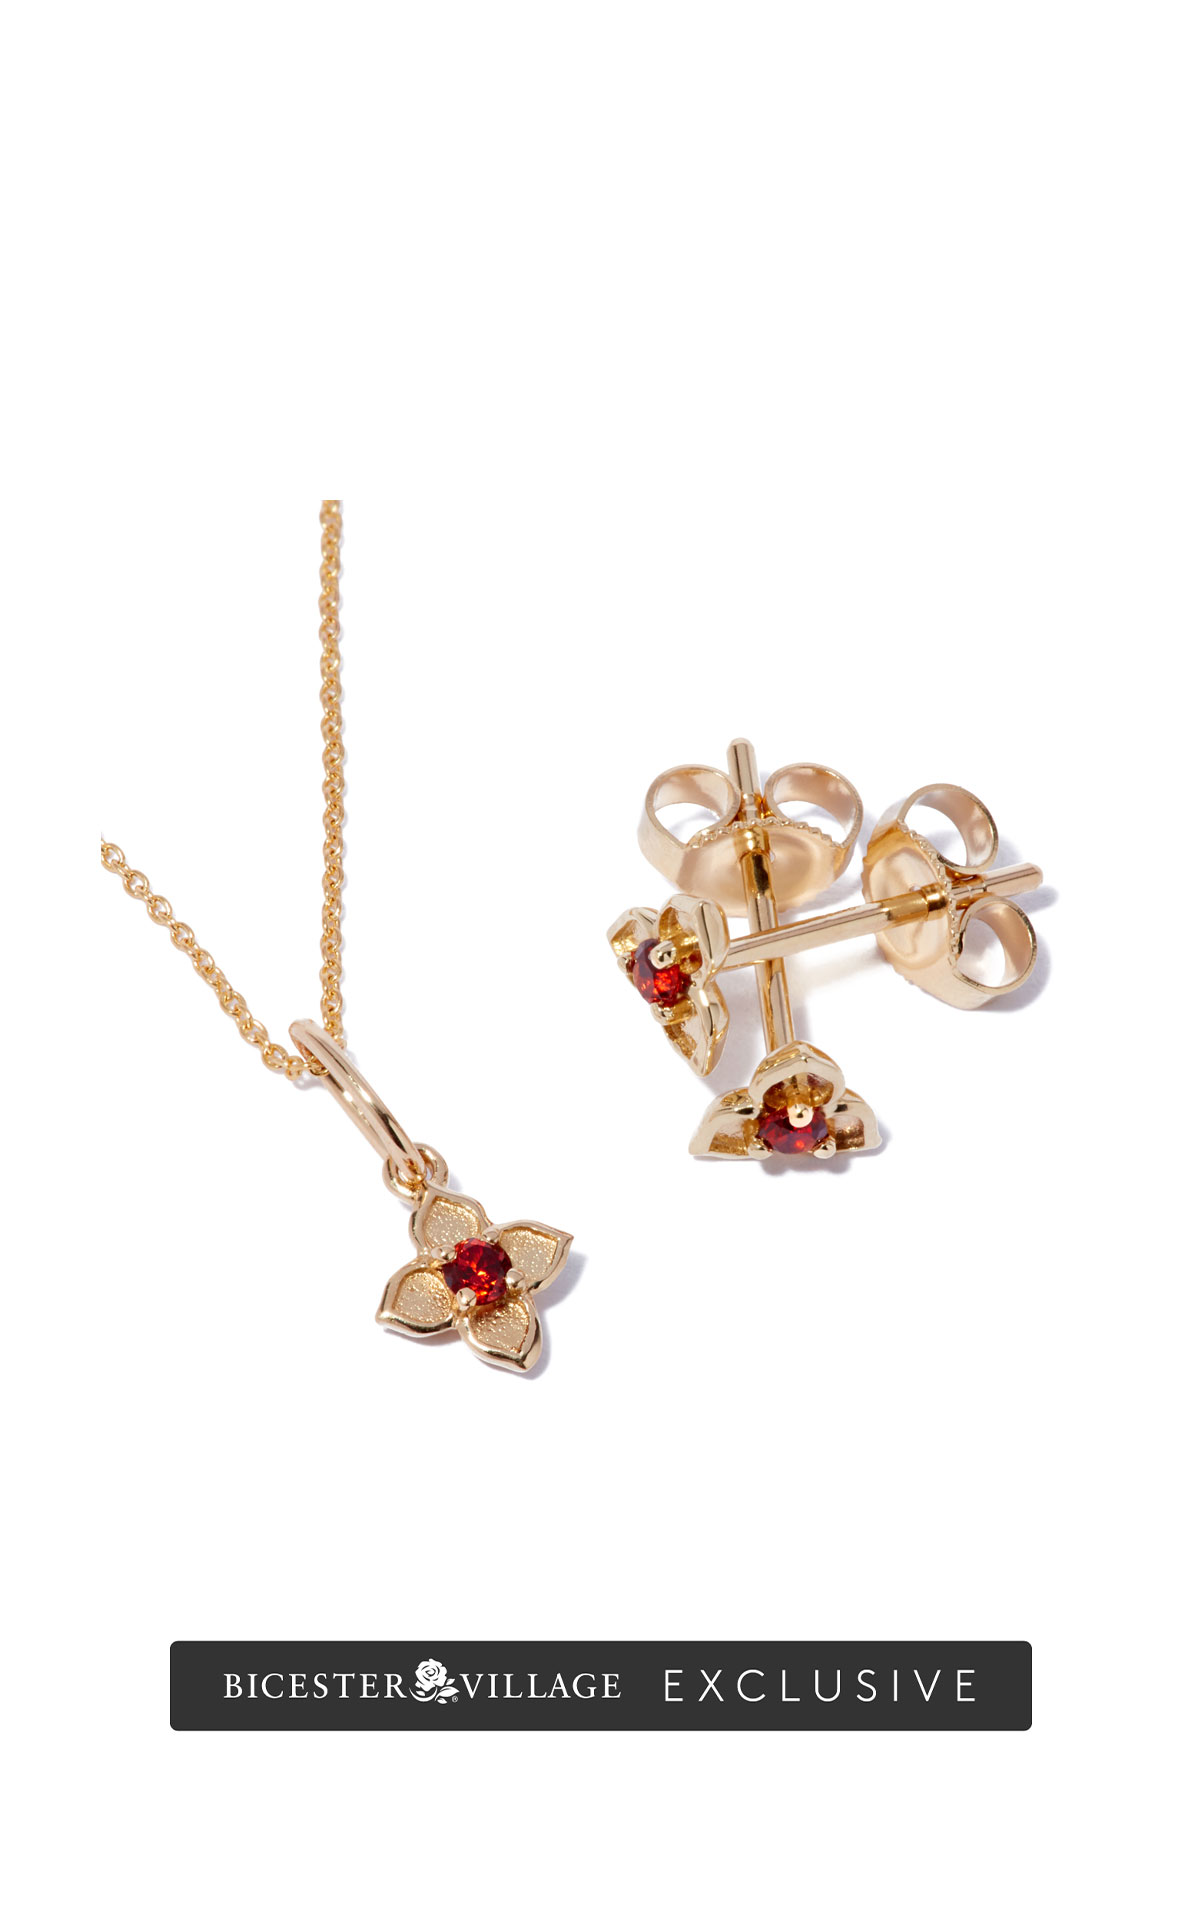 Annoushka Suite of earrings, pendant and fine belcher chain from Bicester Village